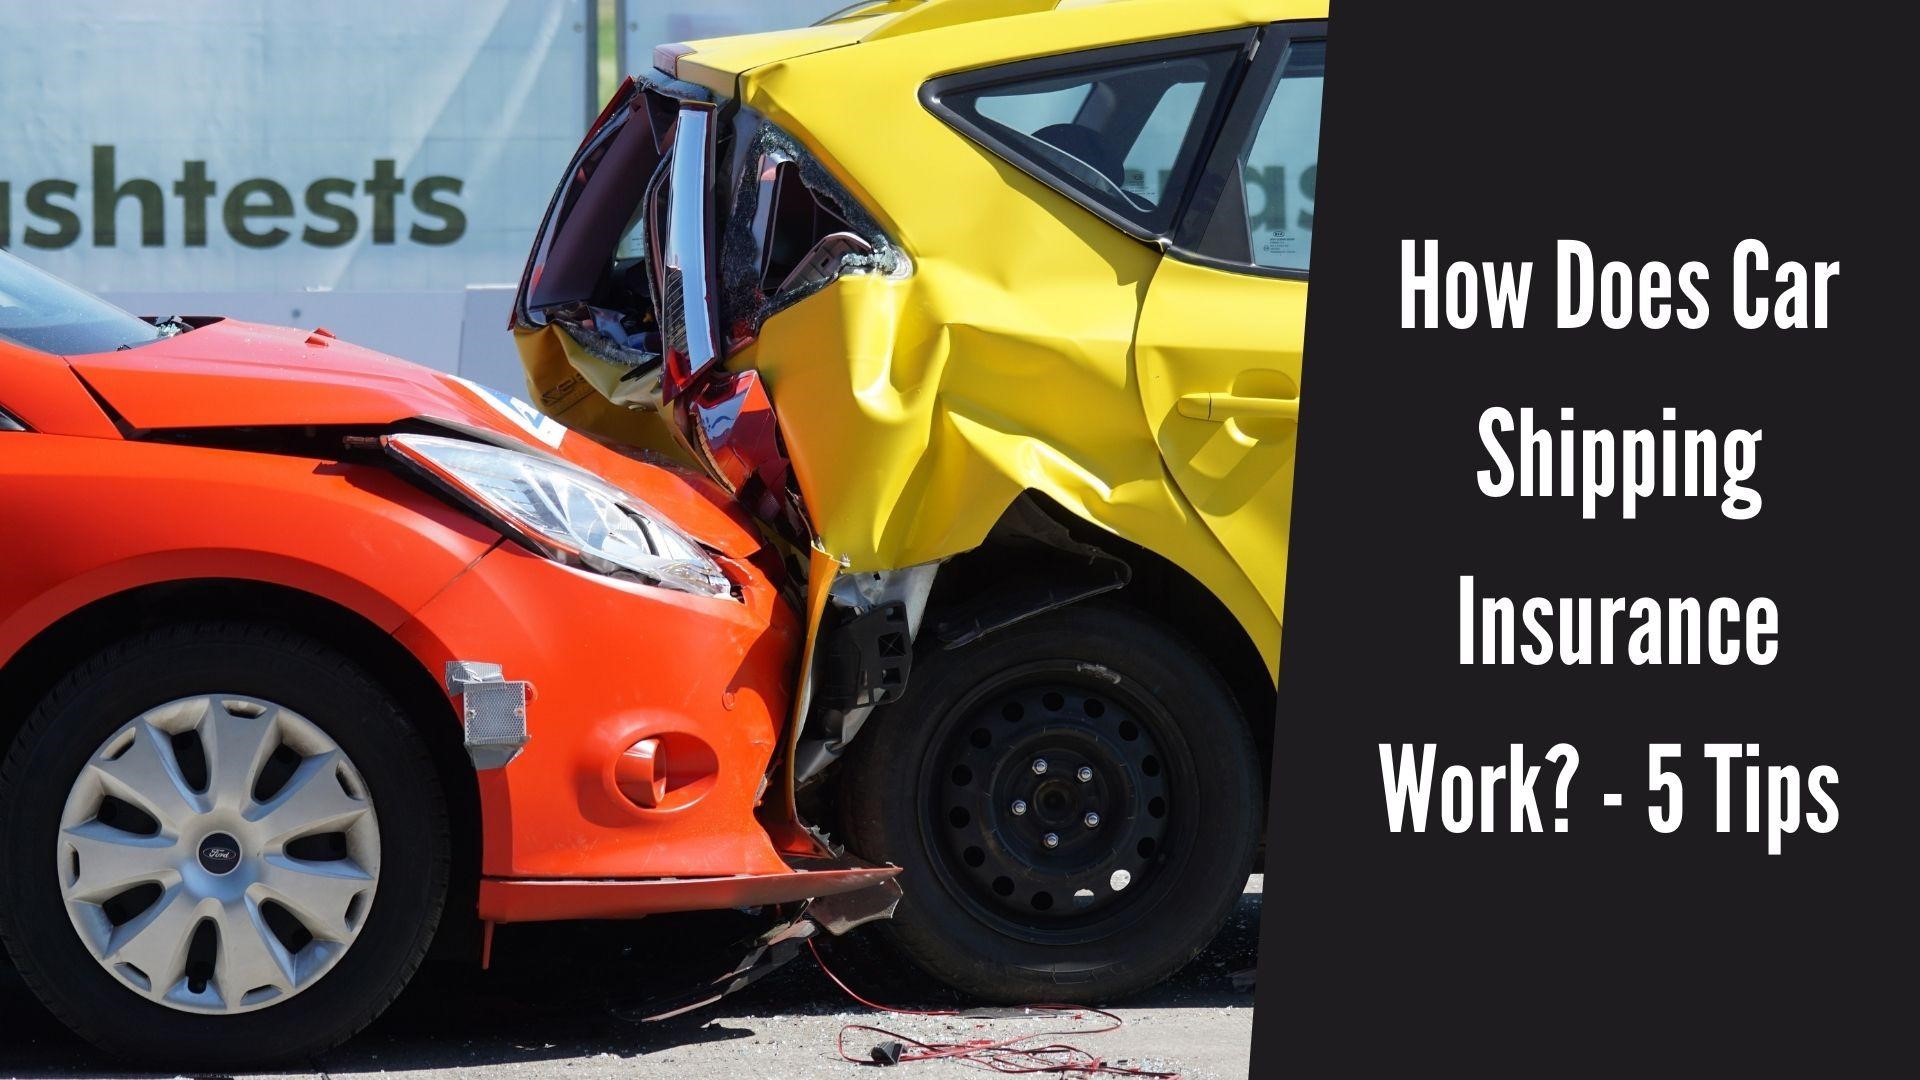 How Does Car Insurance Work?